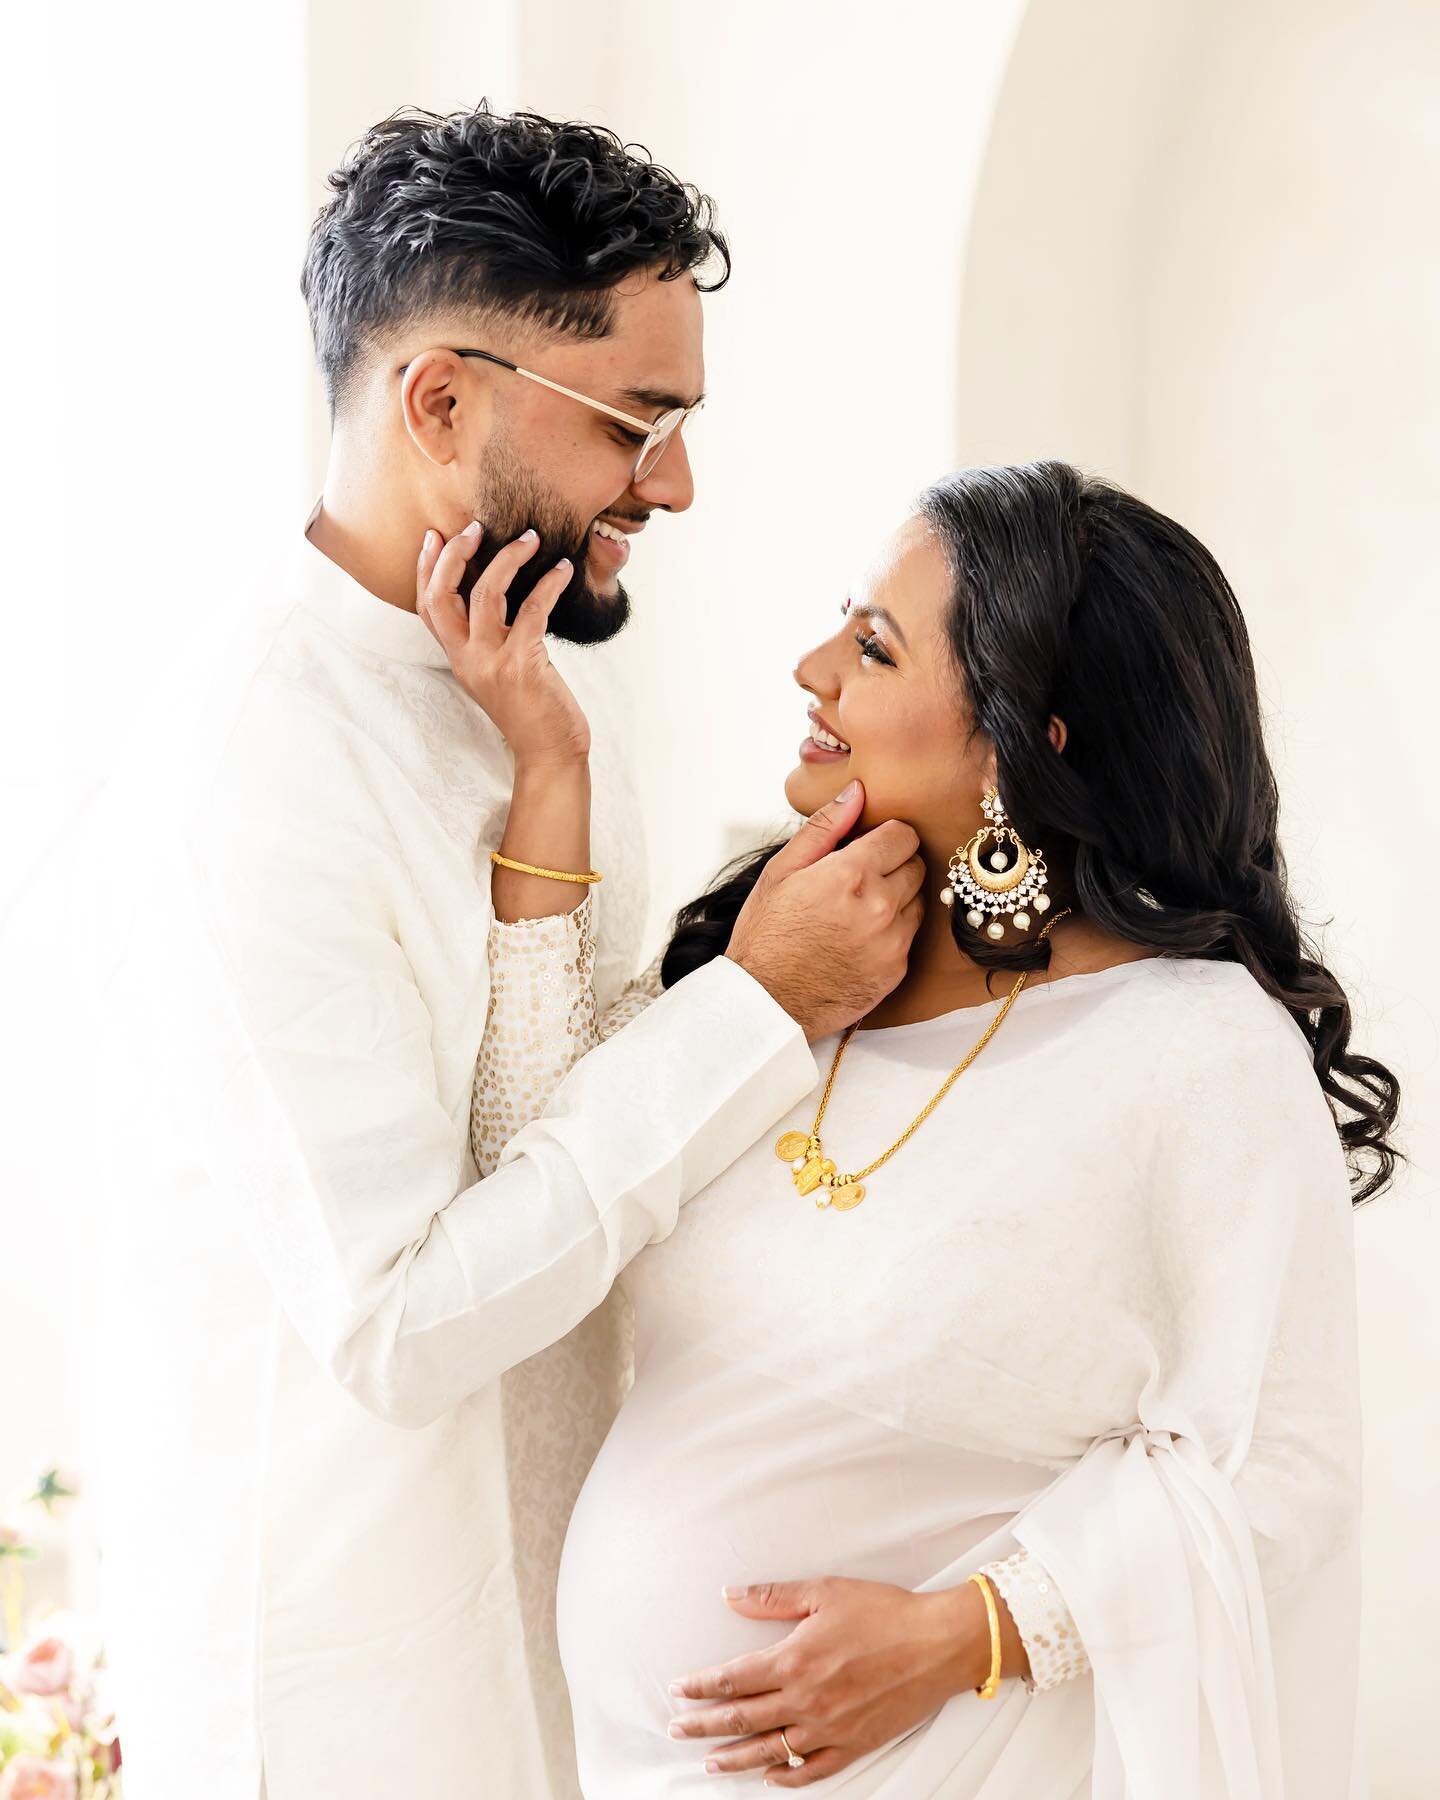 Embracing the Glow of Motherhood! 🌟✨ Celebrating the beauty and strength of an expecting mother. Congratulations to our amazing clients on this incredible journey towards parenthood! 👶💕 Capturing the radiance and anticipation during maternity sess